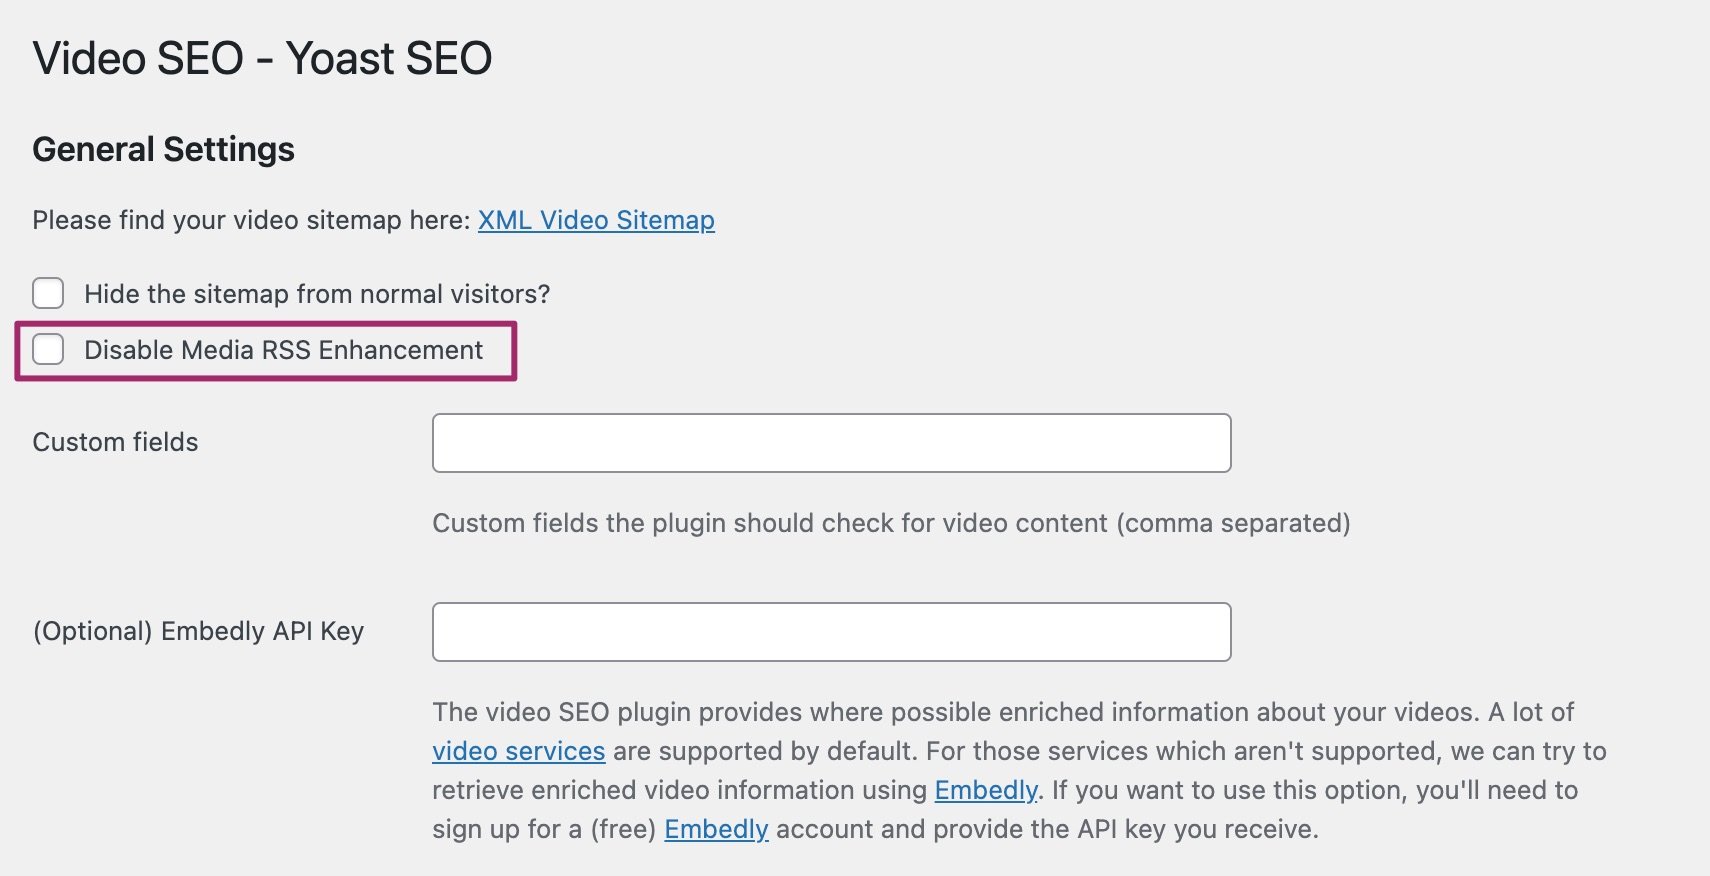 Screenshot of the "Disable Media RSS Enhancement" checkbox in Yoast Video SEO.